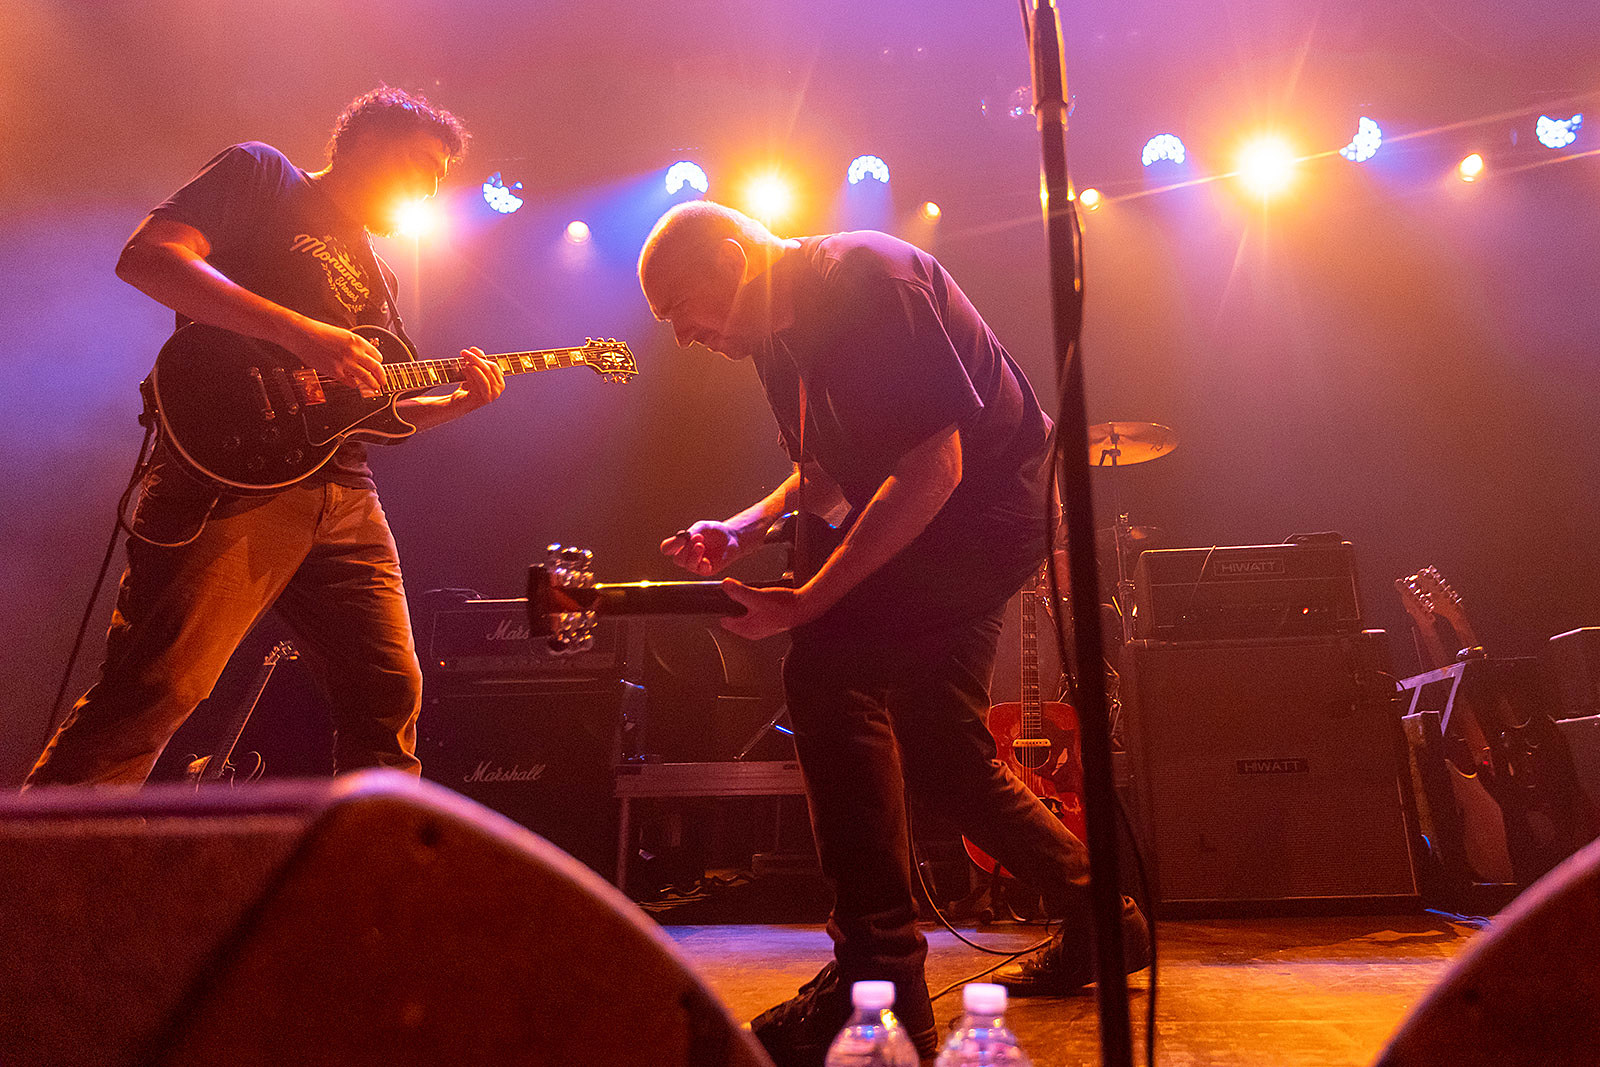 Sunny Day Real Estate add 2nd NYC, LA & Philadelphia shows to 'Diary' tour